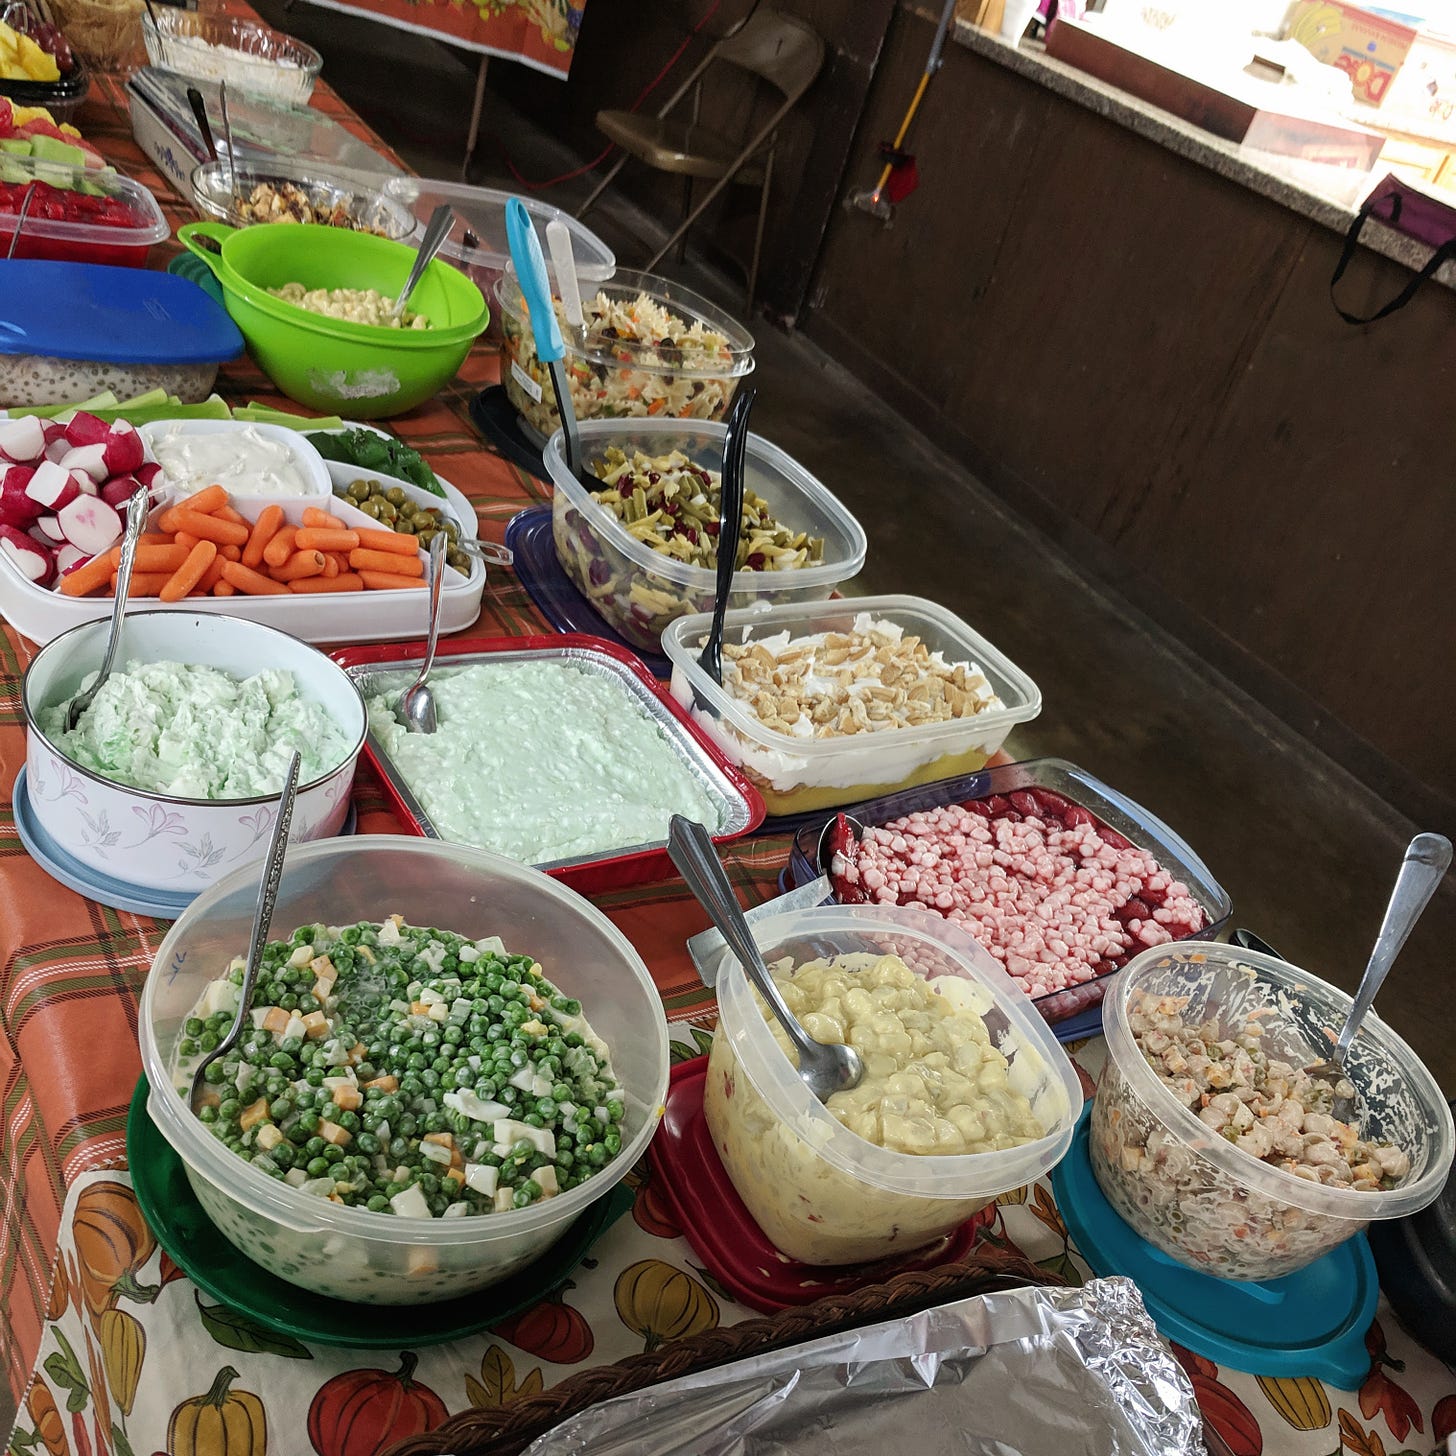 A long row of dishes at a potluck, mostly jello and vegetables